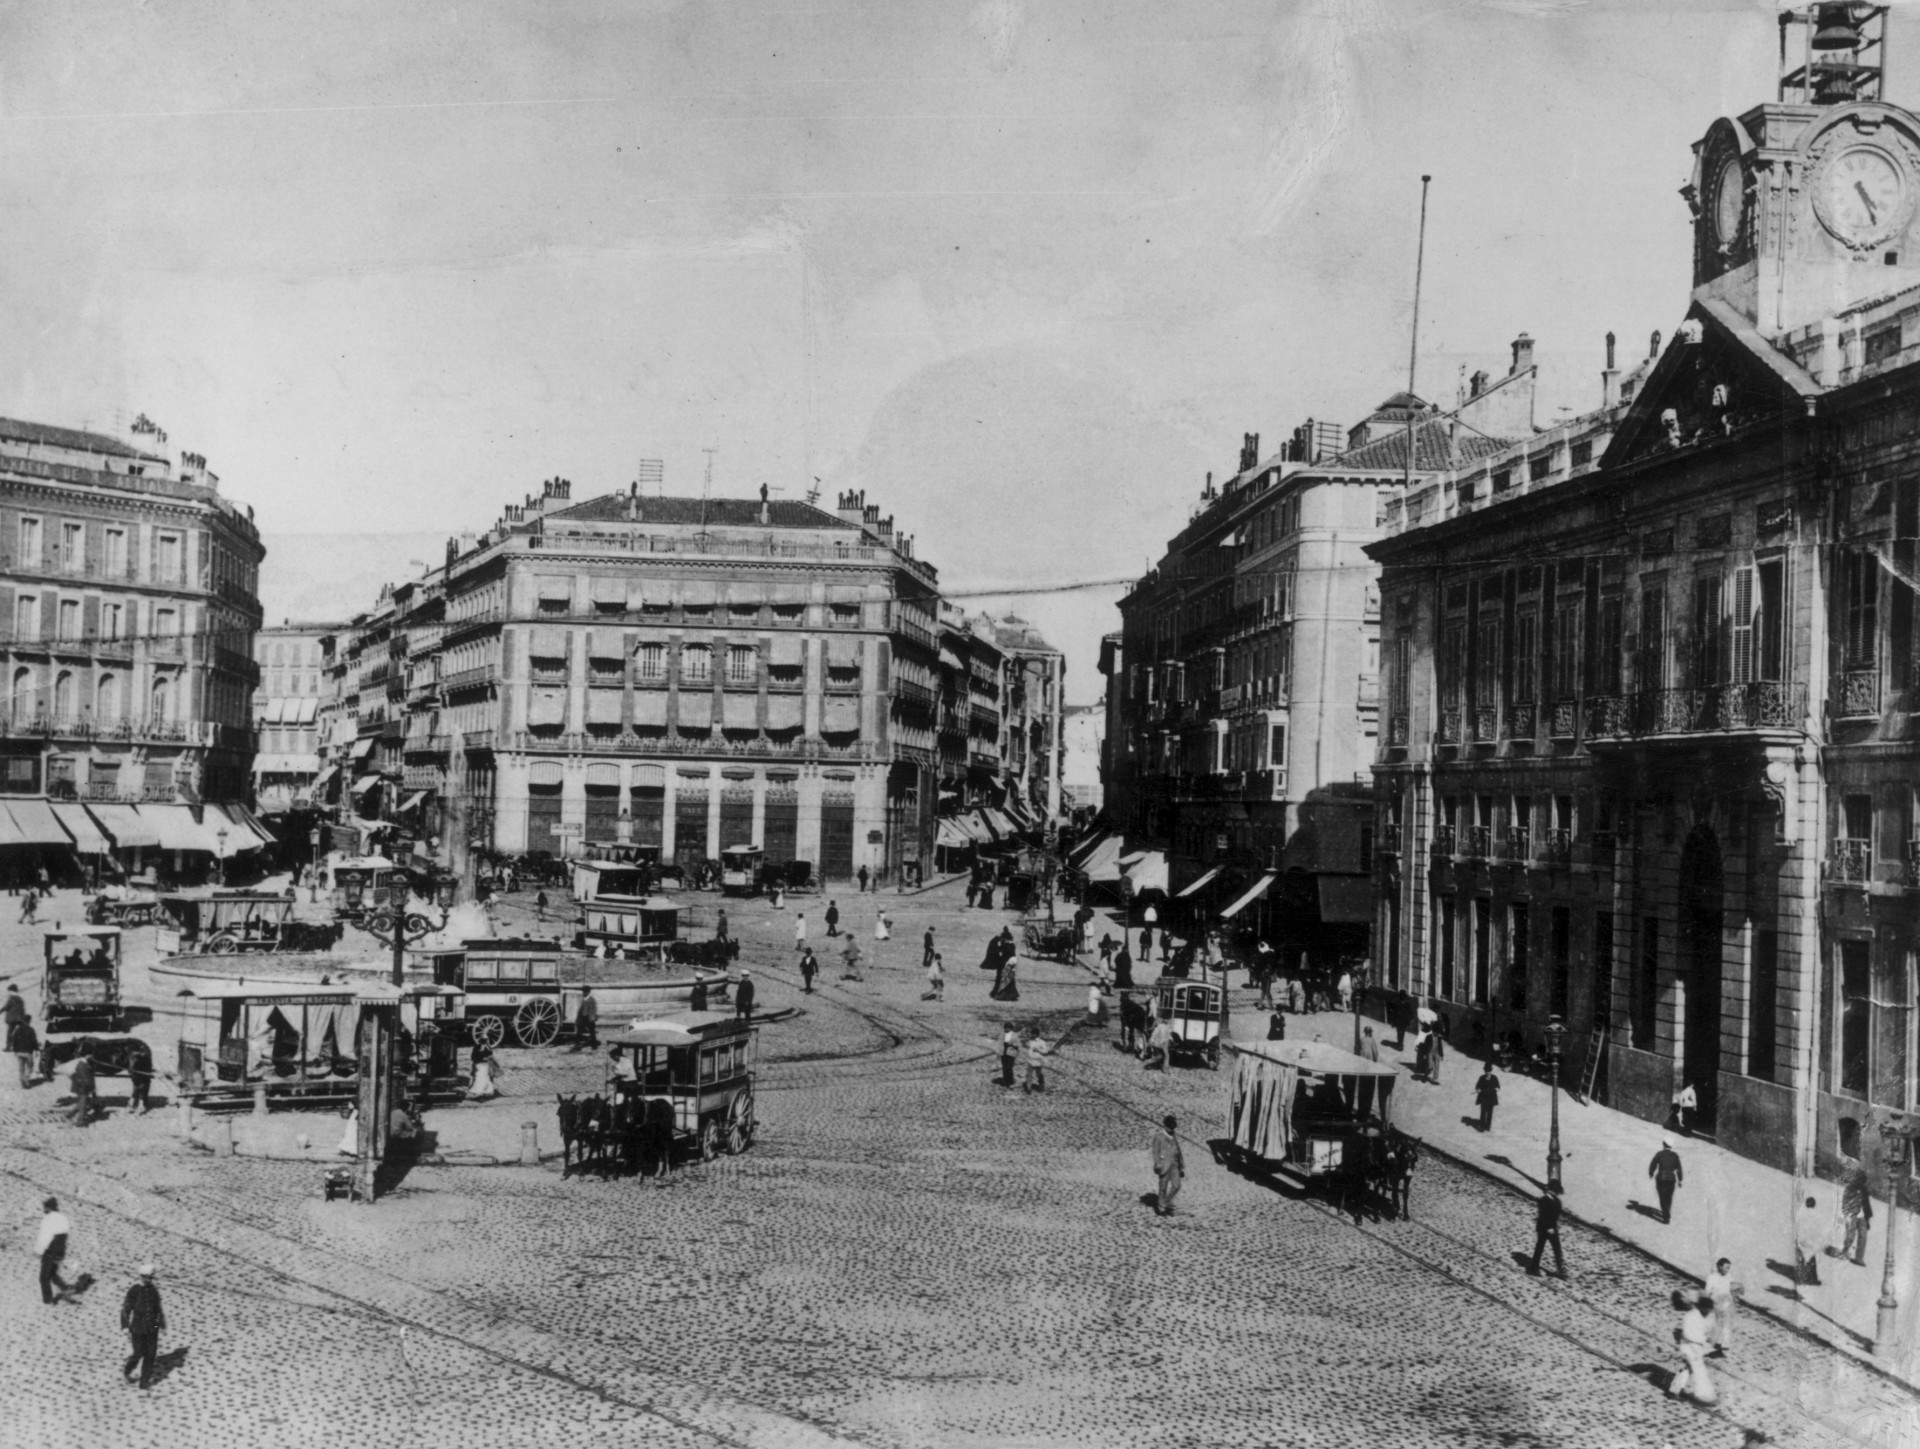 The Puerta del Sol, one of the most iconic locations in Madrid in 1880.<p><a href="https://www.msn.com/en-us/community/channel/vid-7xx8mnucu55yw63we9va2gwr7uihbxwc68fxqp25x6tg4ftibpra?cvid=94631541bc0f4f89bfd59158d696ad7e">Follow us and access great exclusive content every day</a></p>